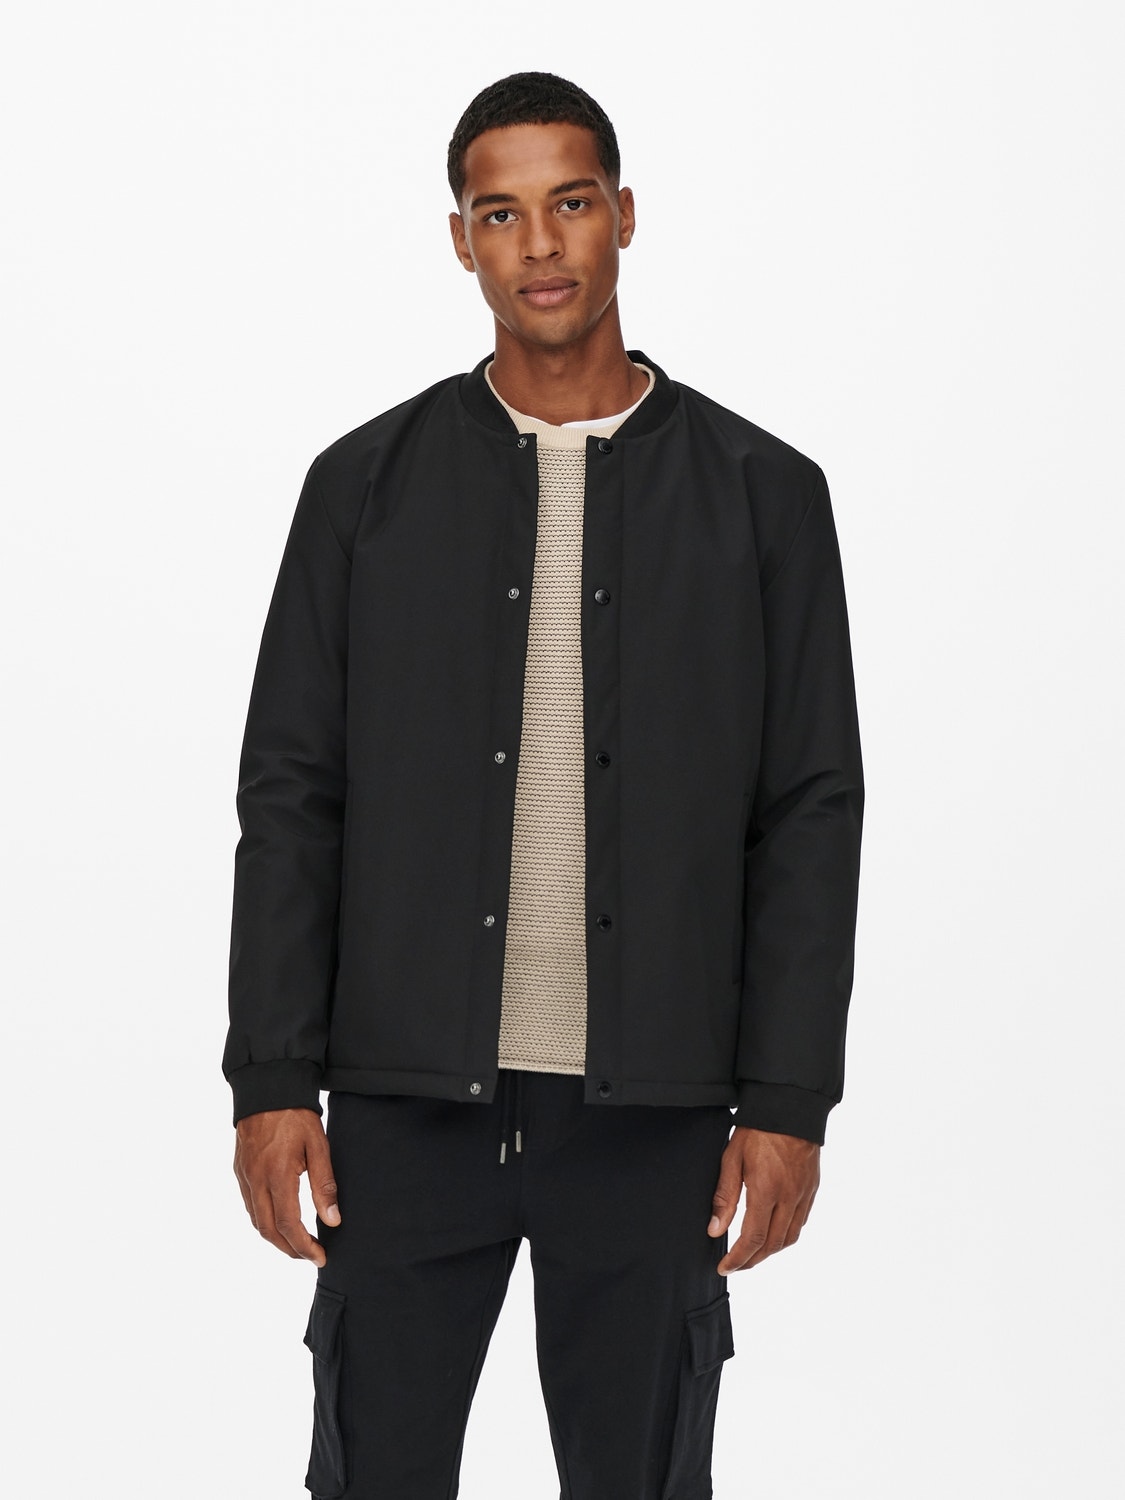 ONLY & SONS Elasticated cuffs Jacket -Black - 22019881